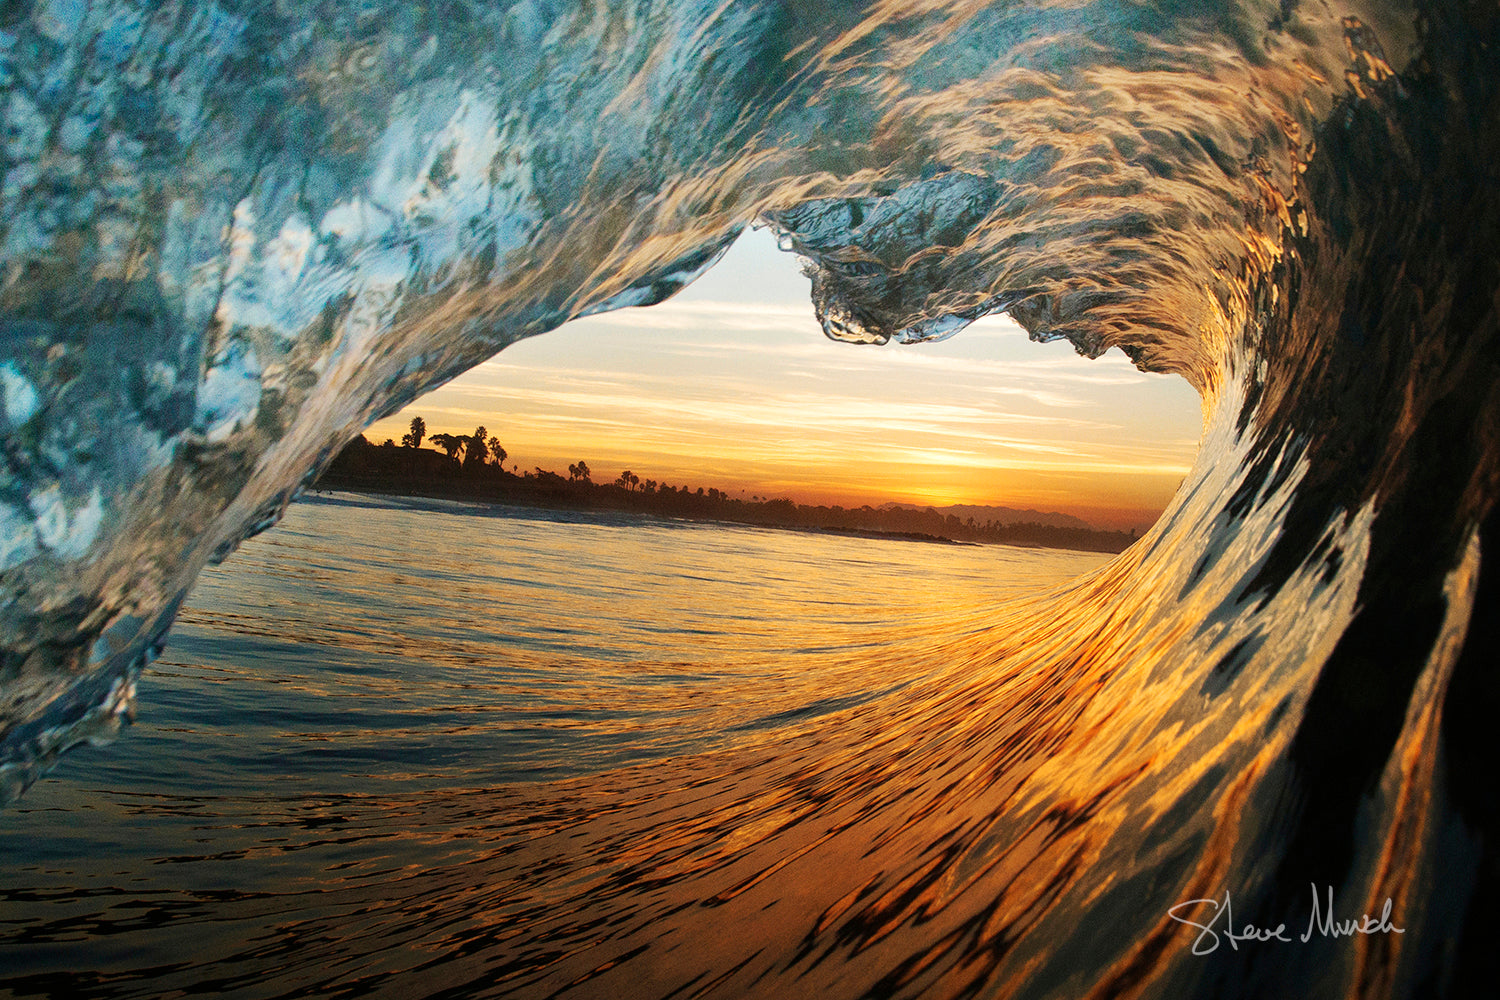 Nature photograph taken from inside the barrel of a stunning glassy ocean wave.